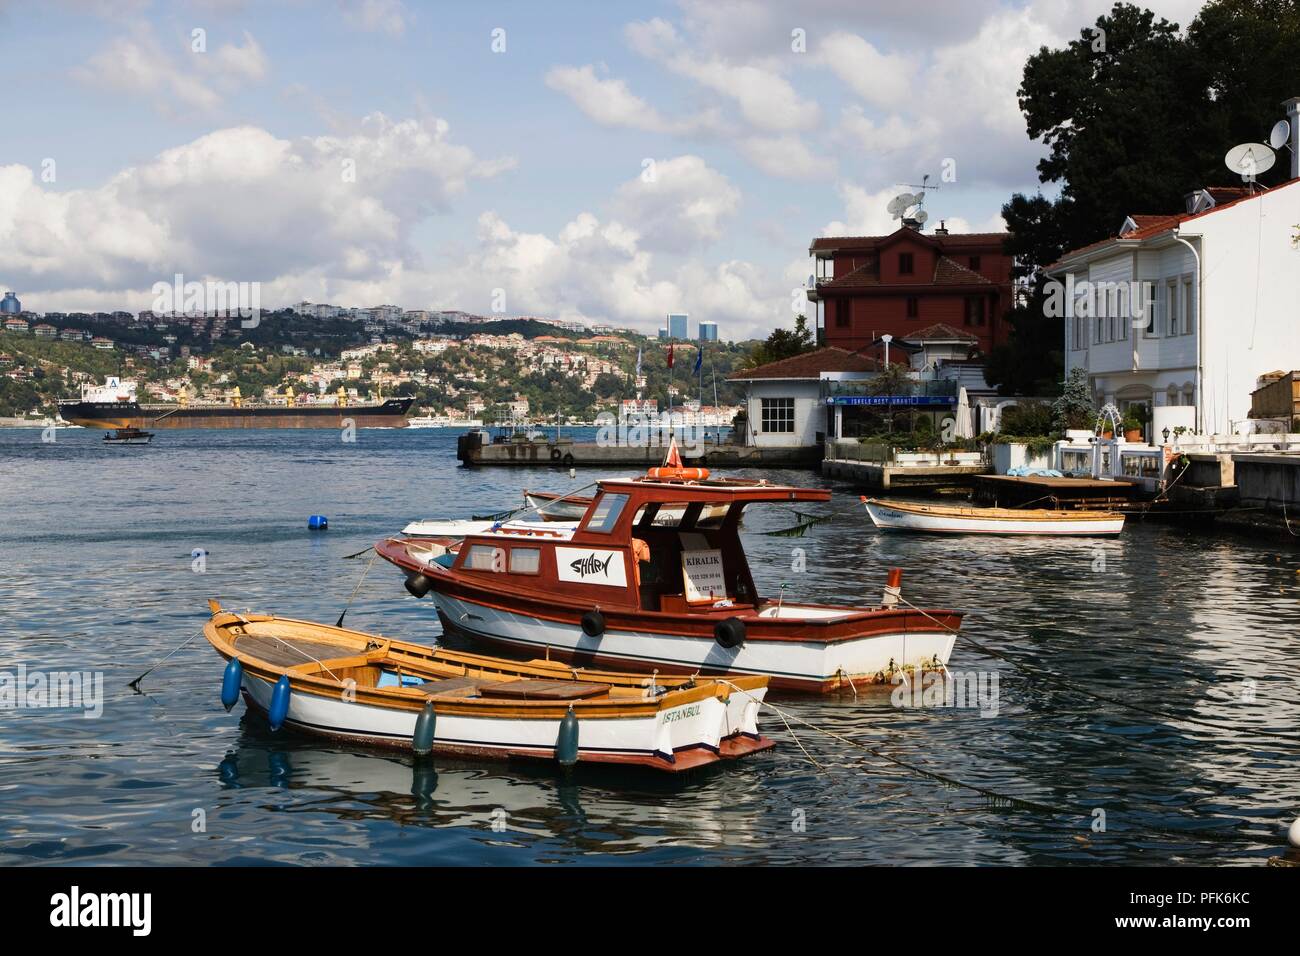 Turkey, Istanbul, Cengelkoy area, waterfront with boats Stock Photo